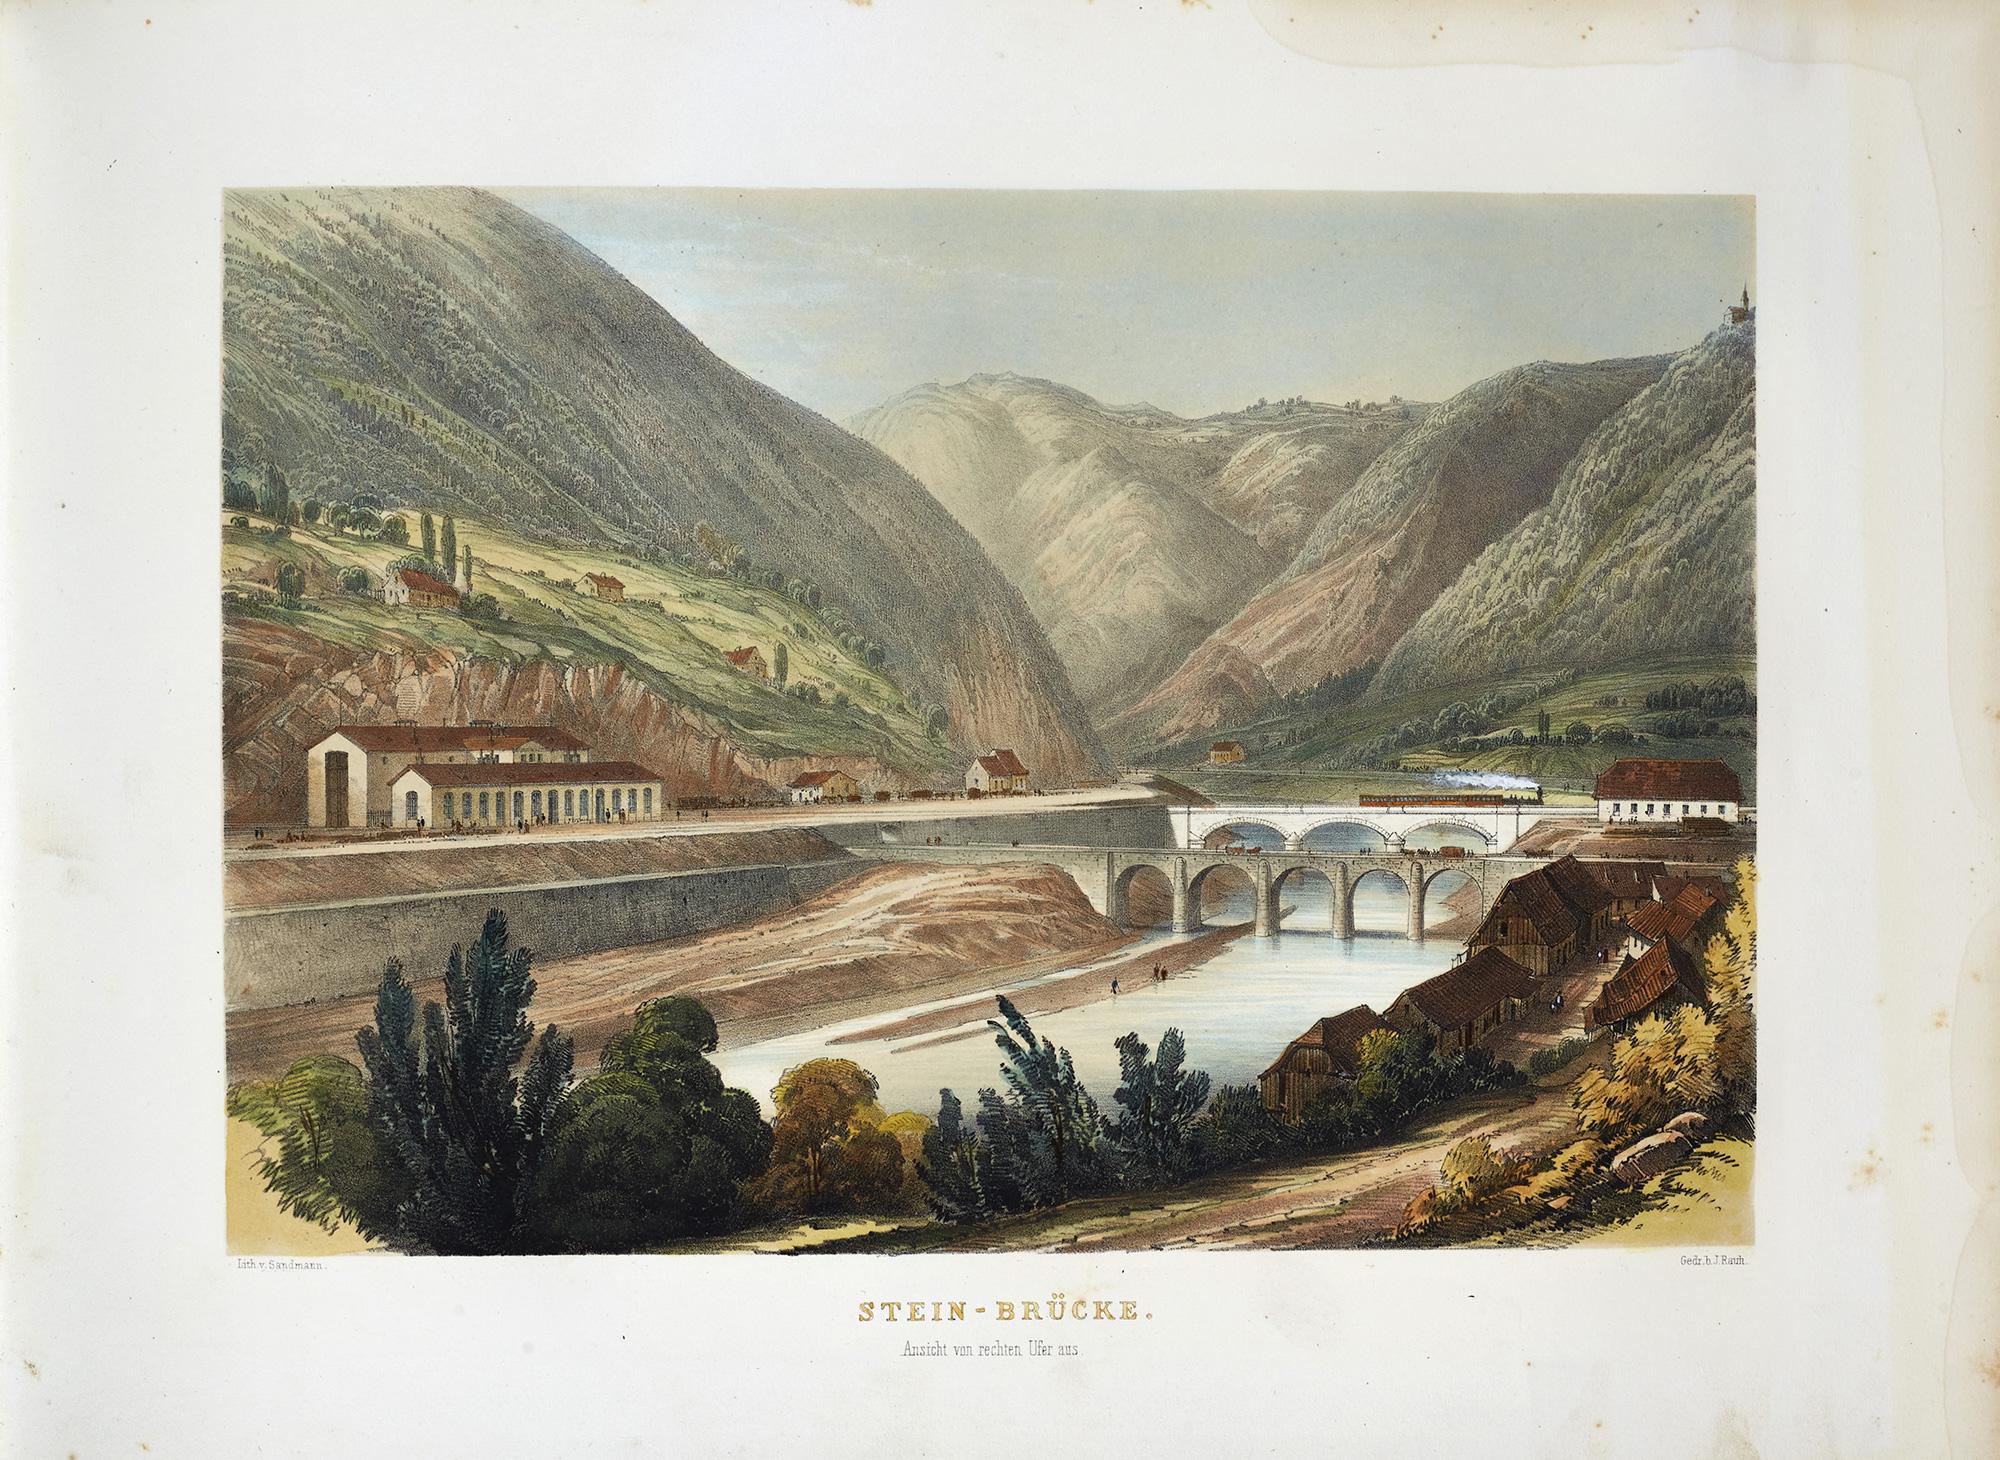 FIRST EDITION
Sandmann, František Xaver (1805-1856)
Malerische Ansichten / Picturesque Views (of first railway lines in Slovenia); To commemorate the opening of the railway line from Cilli to Laibach by his k. k. Majesty Emperor Franz Josef I on